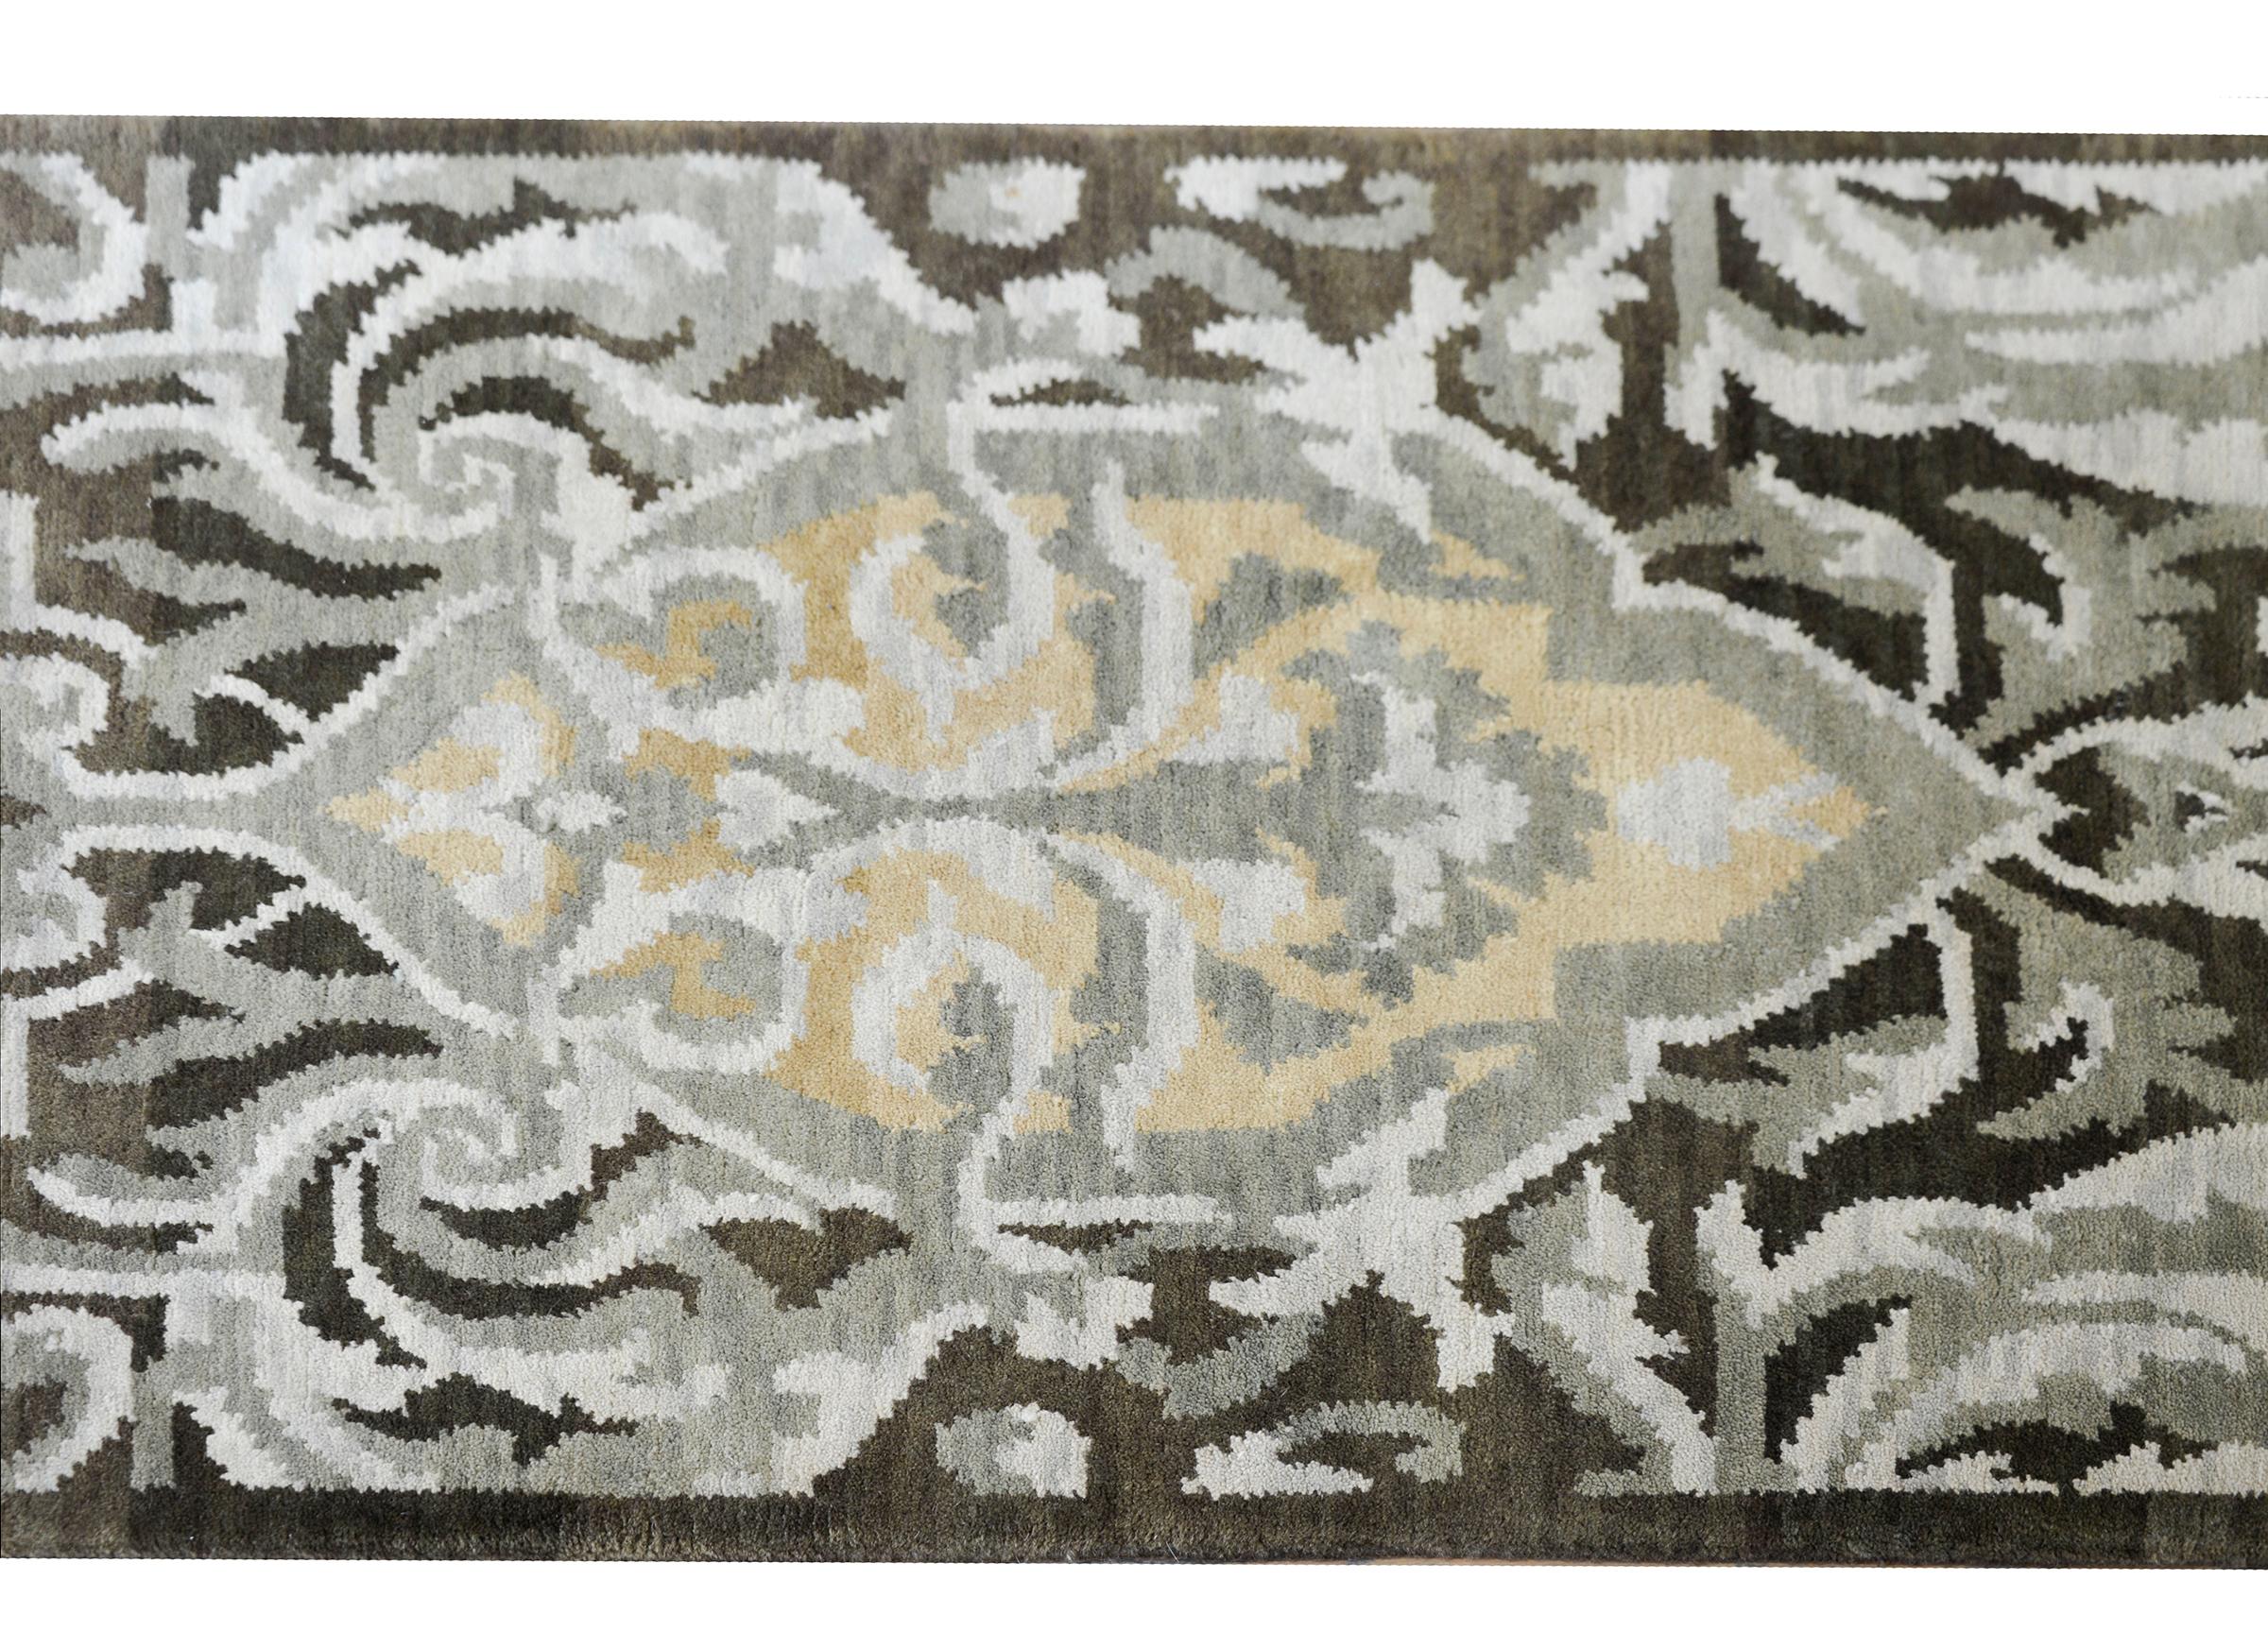 A contemporary Tibetan hand-knotted wool rug with a baroque-inspired floral pattern with acanthus leaves and flowers woven in varying shades of gray and gold, and set against a dark gray background.